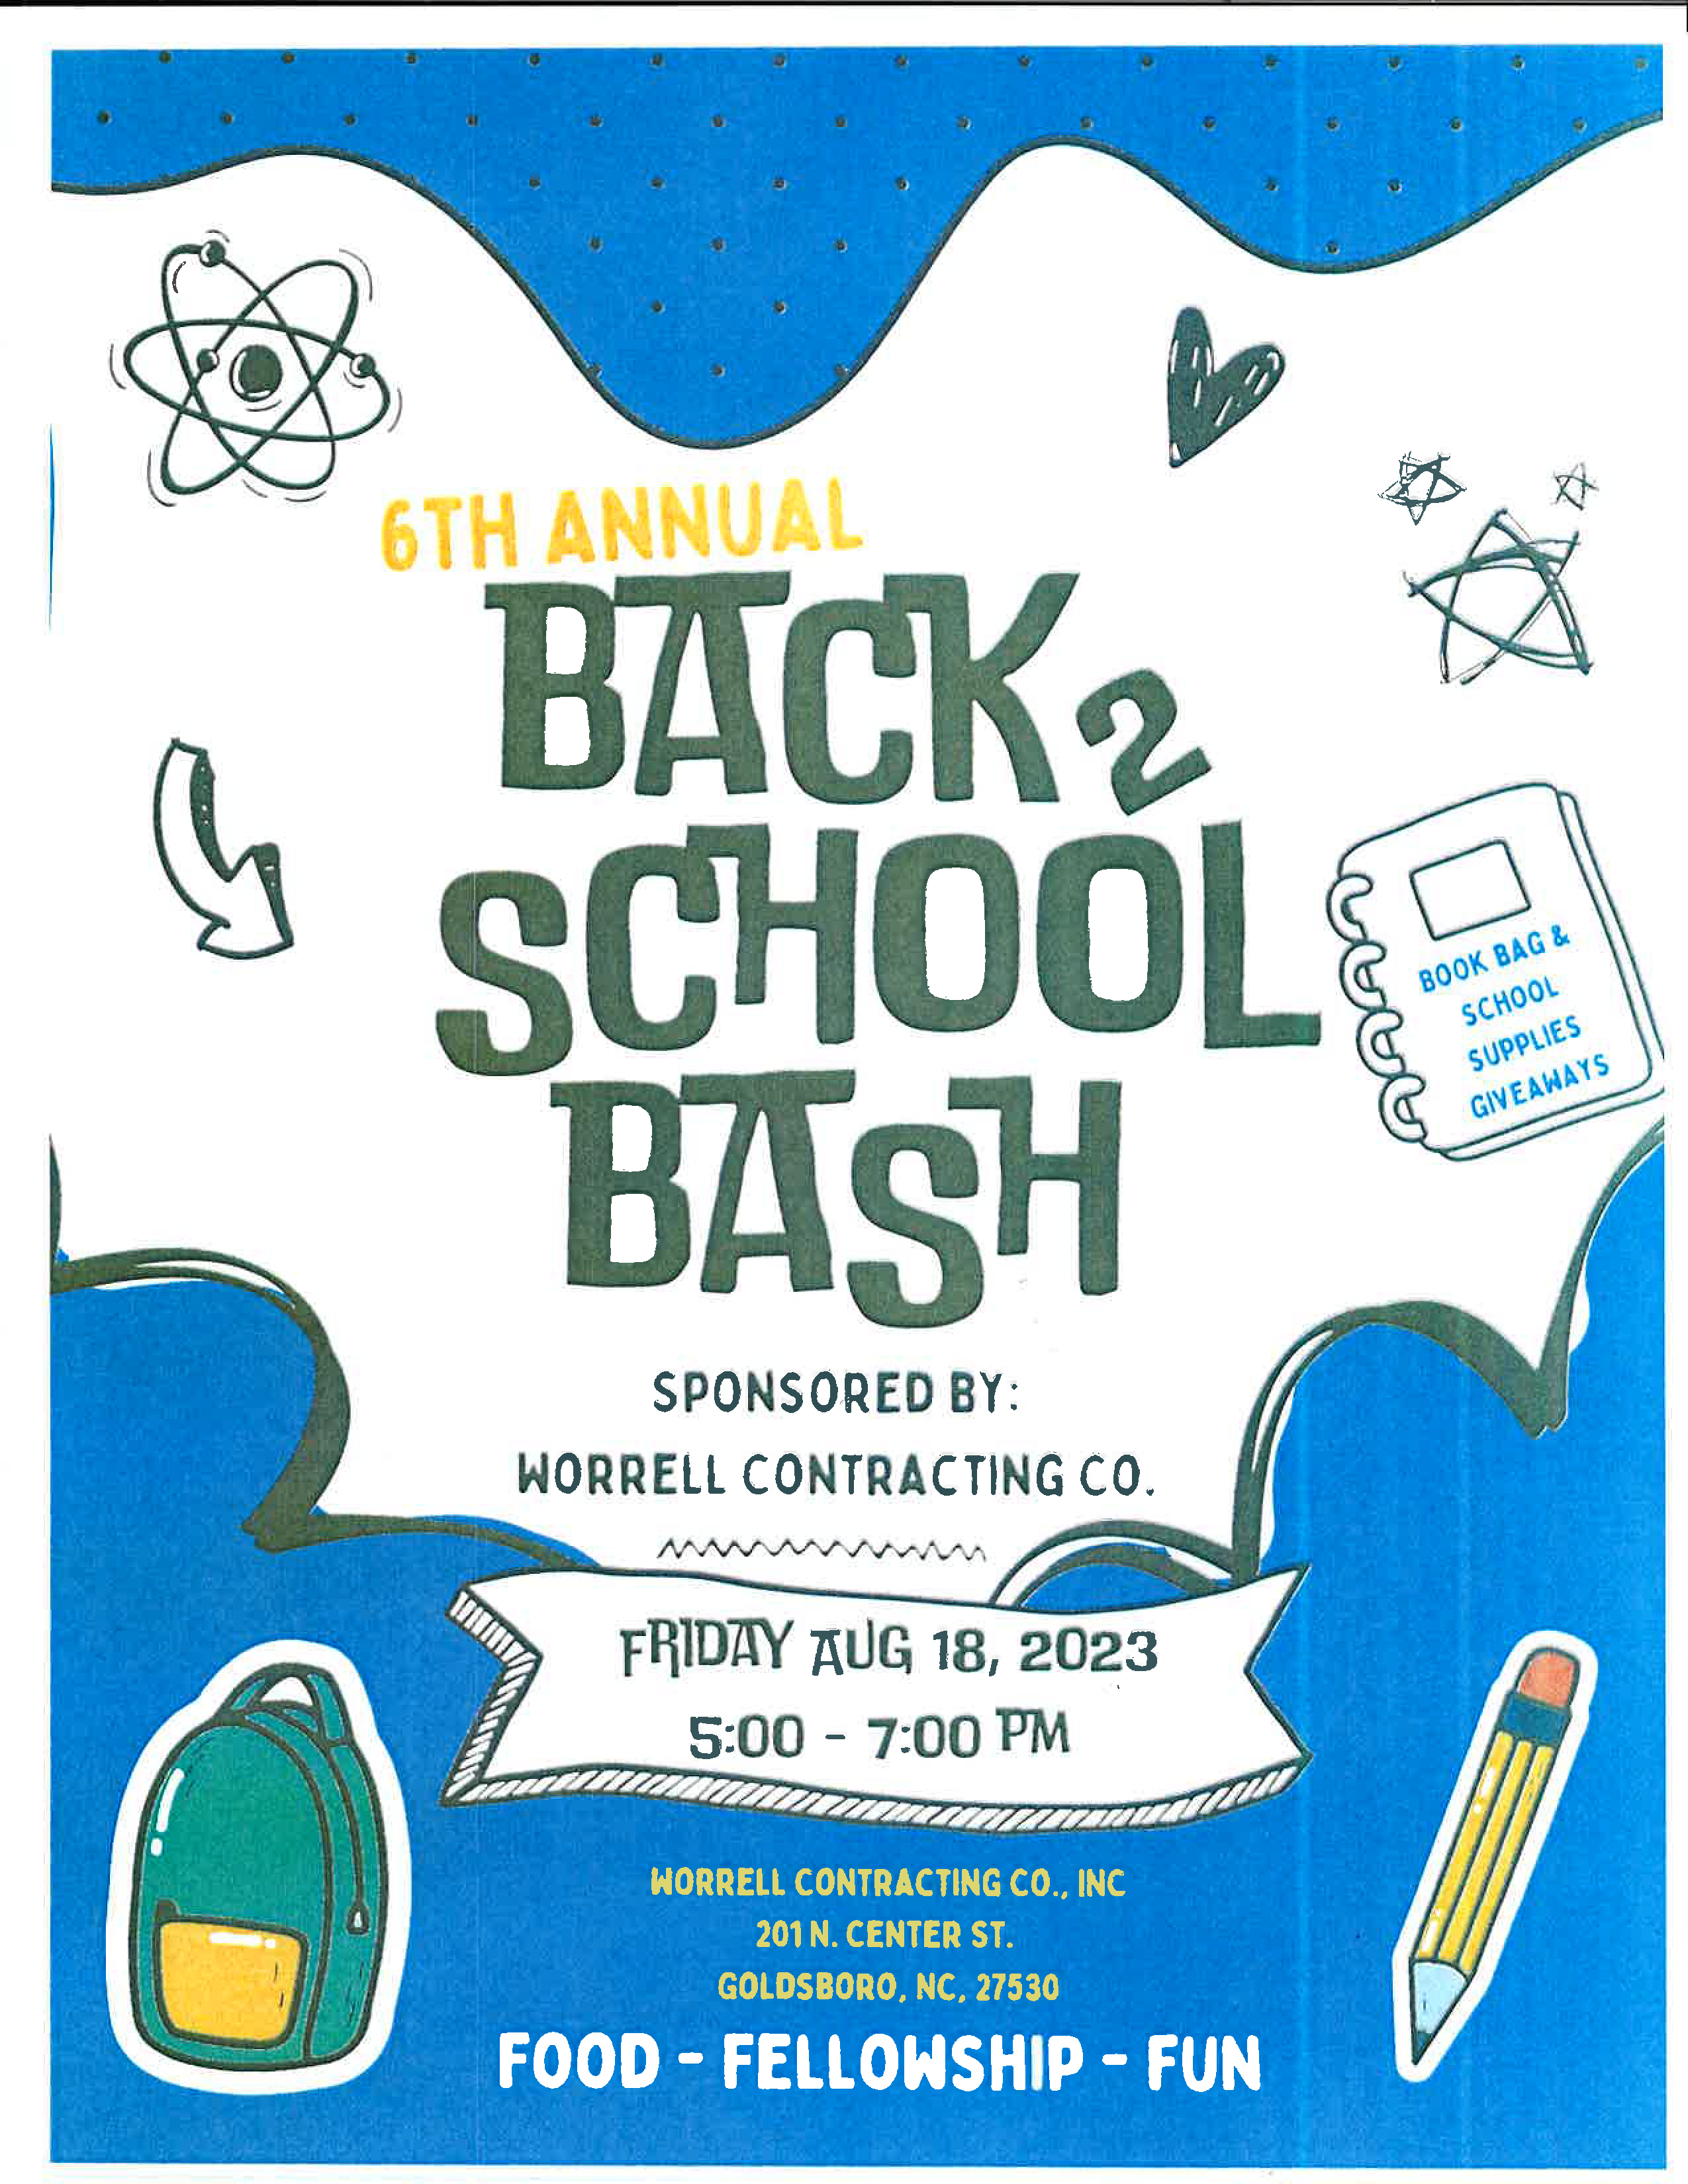 Worrell Contracting Hosting Annual Back to School Bash Friday Evening